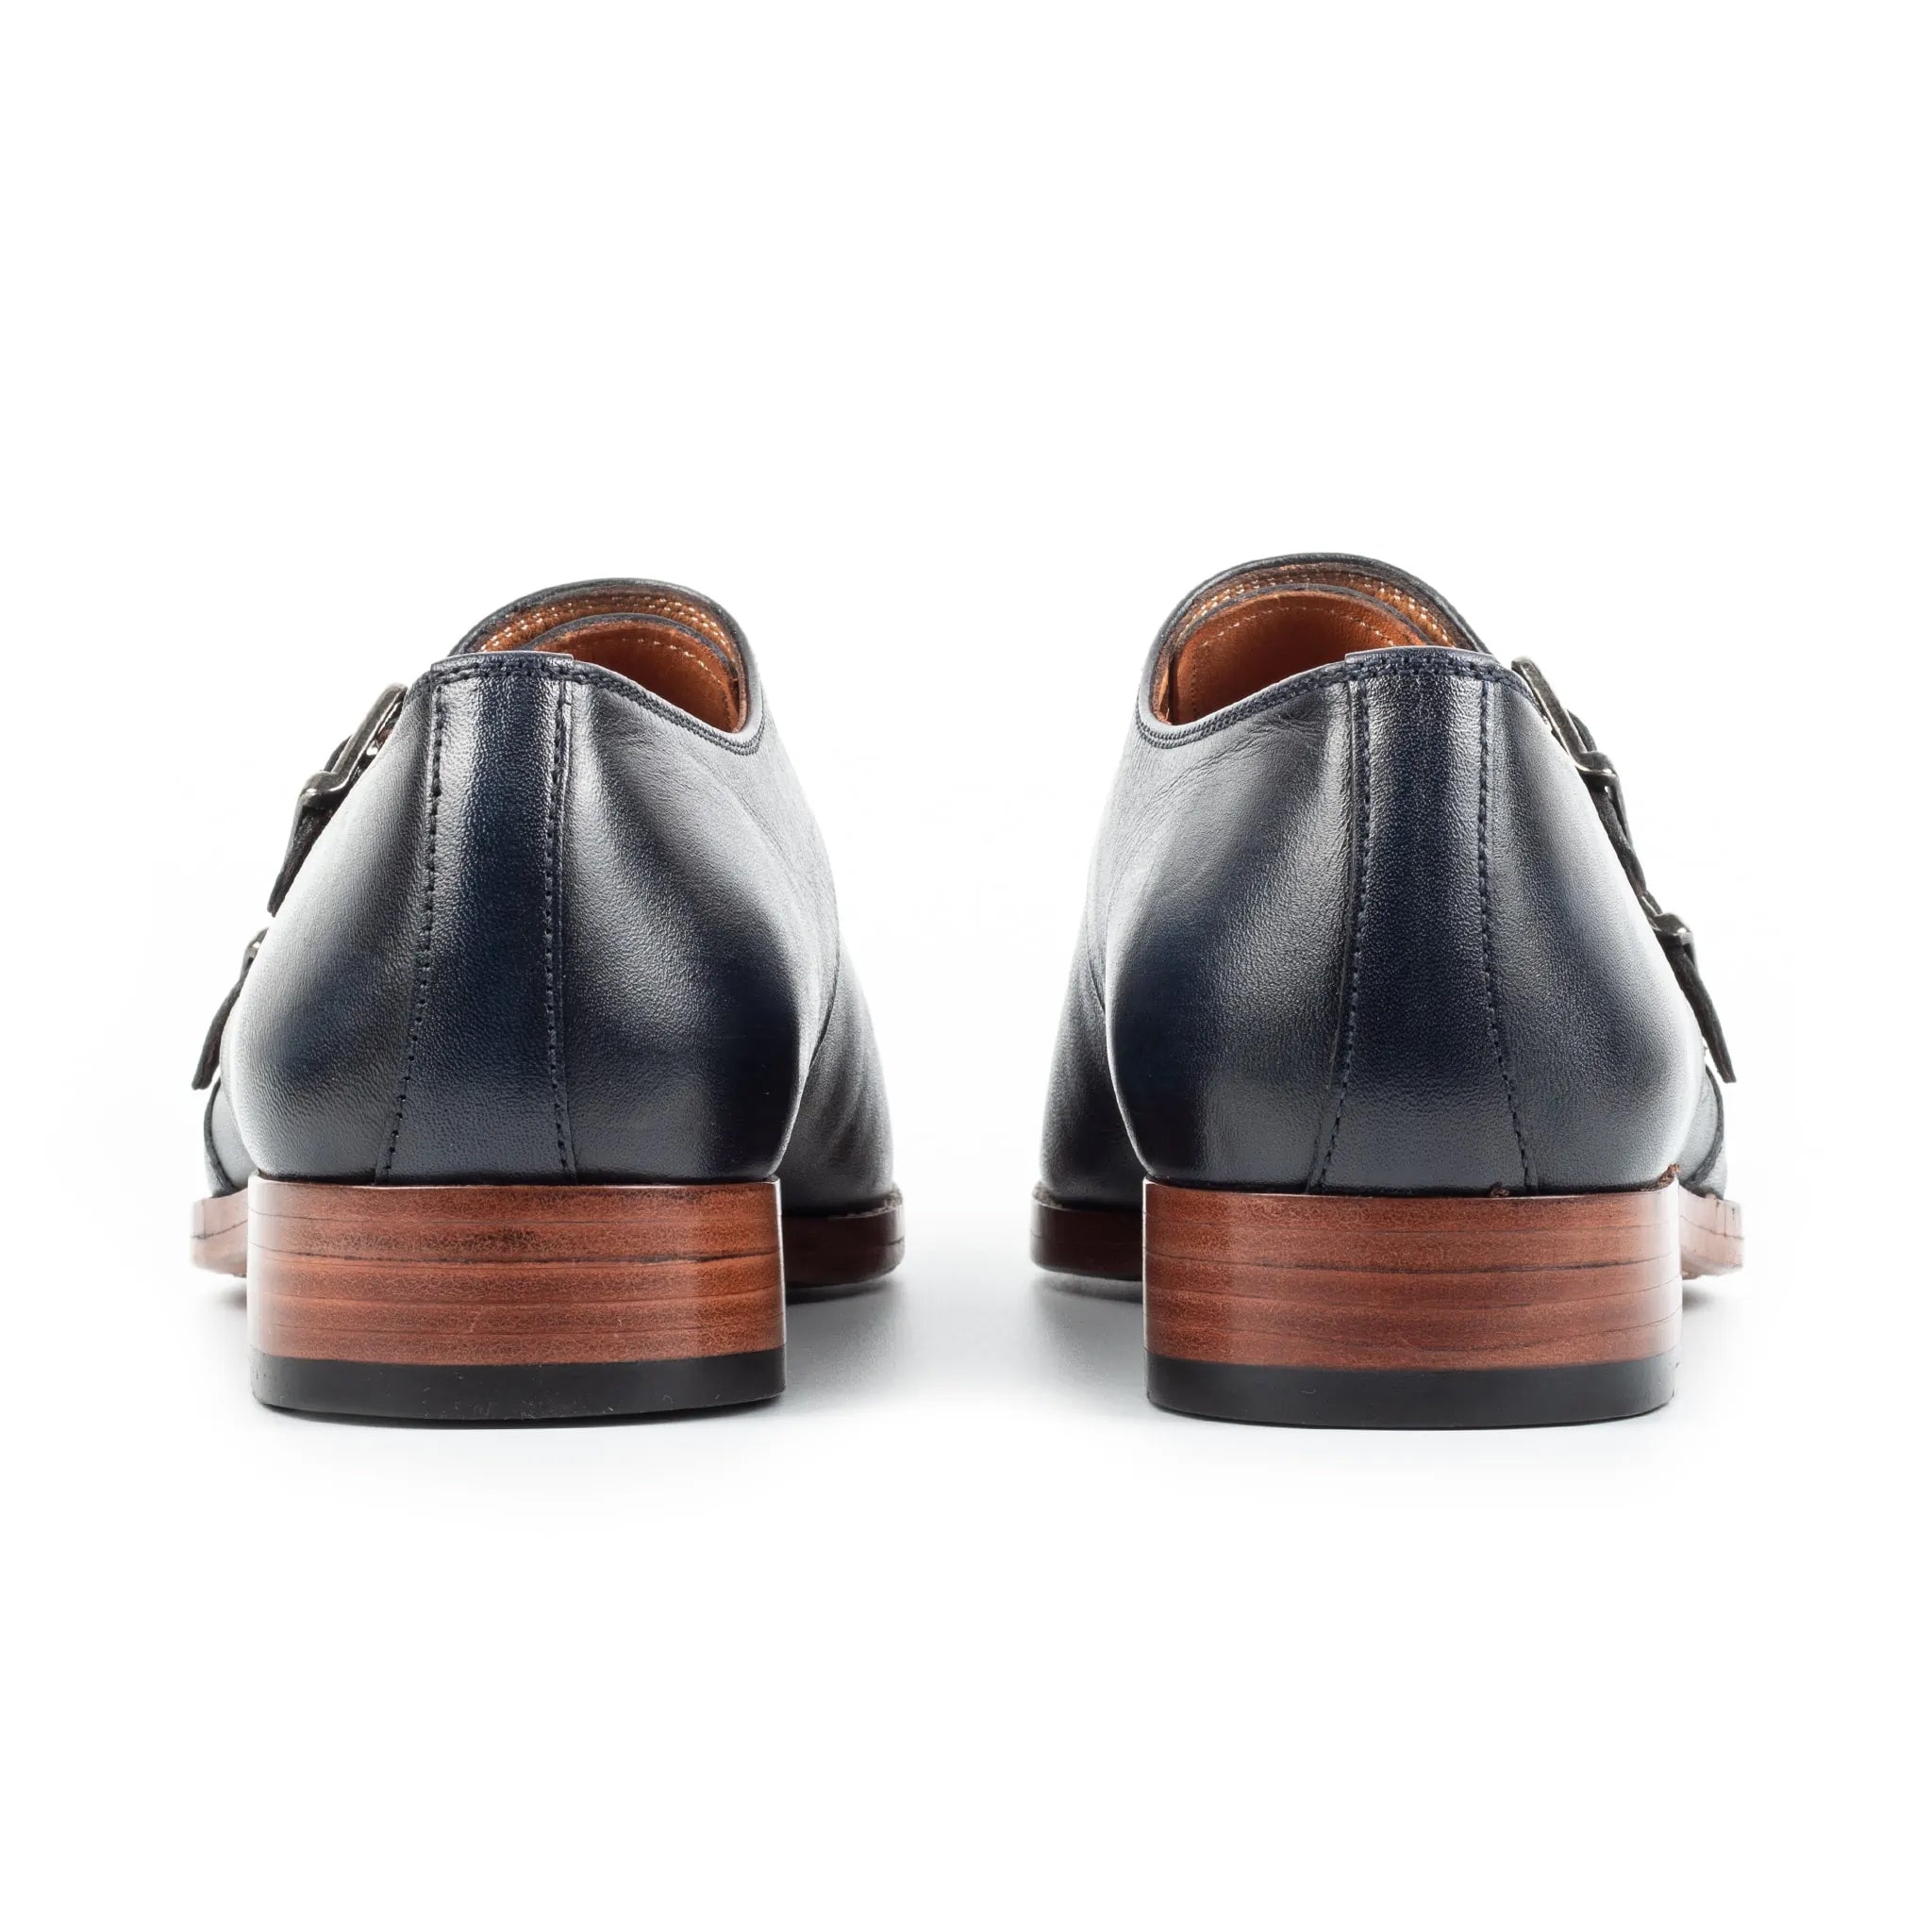 Midnight Genuine Leather Double Monk Strap Men's Shoes